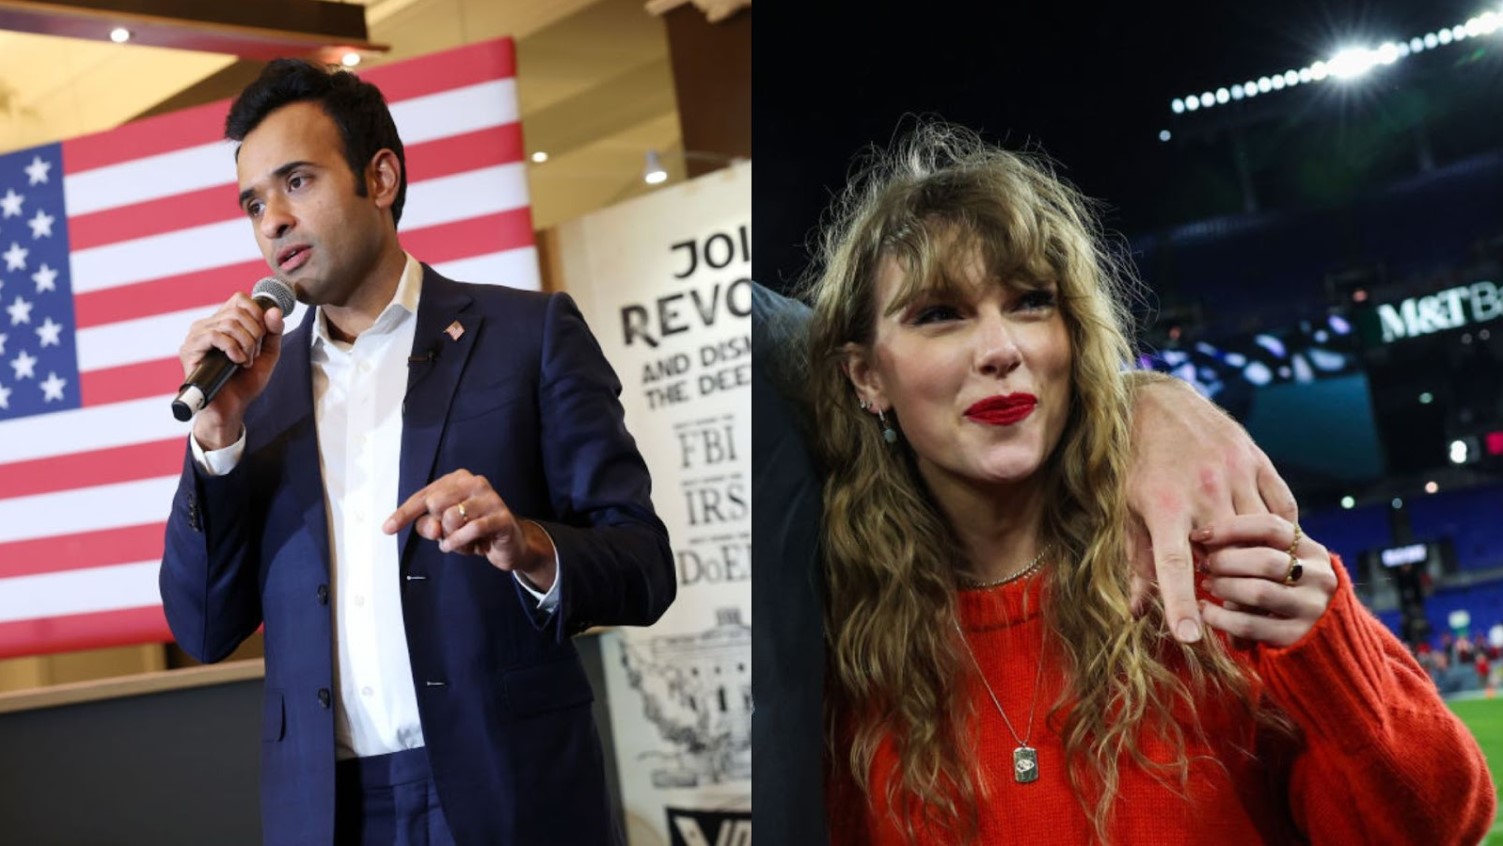 Vivek Ramaswamy gives a speech at the Surety Hotel in Des Moines, Iowa/Travis Kelce of the Kansas City Chiefs NFL team pictured alongside his girlfriend Taylor Swift